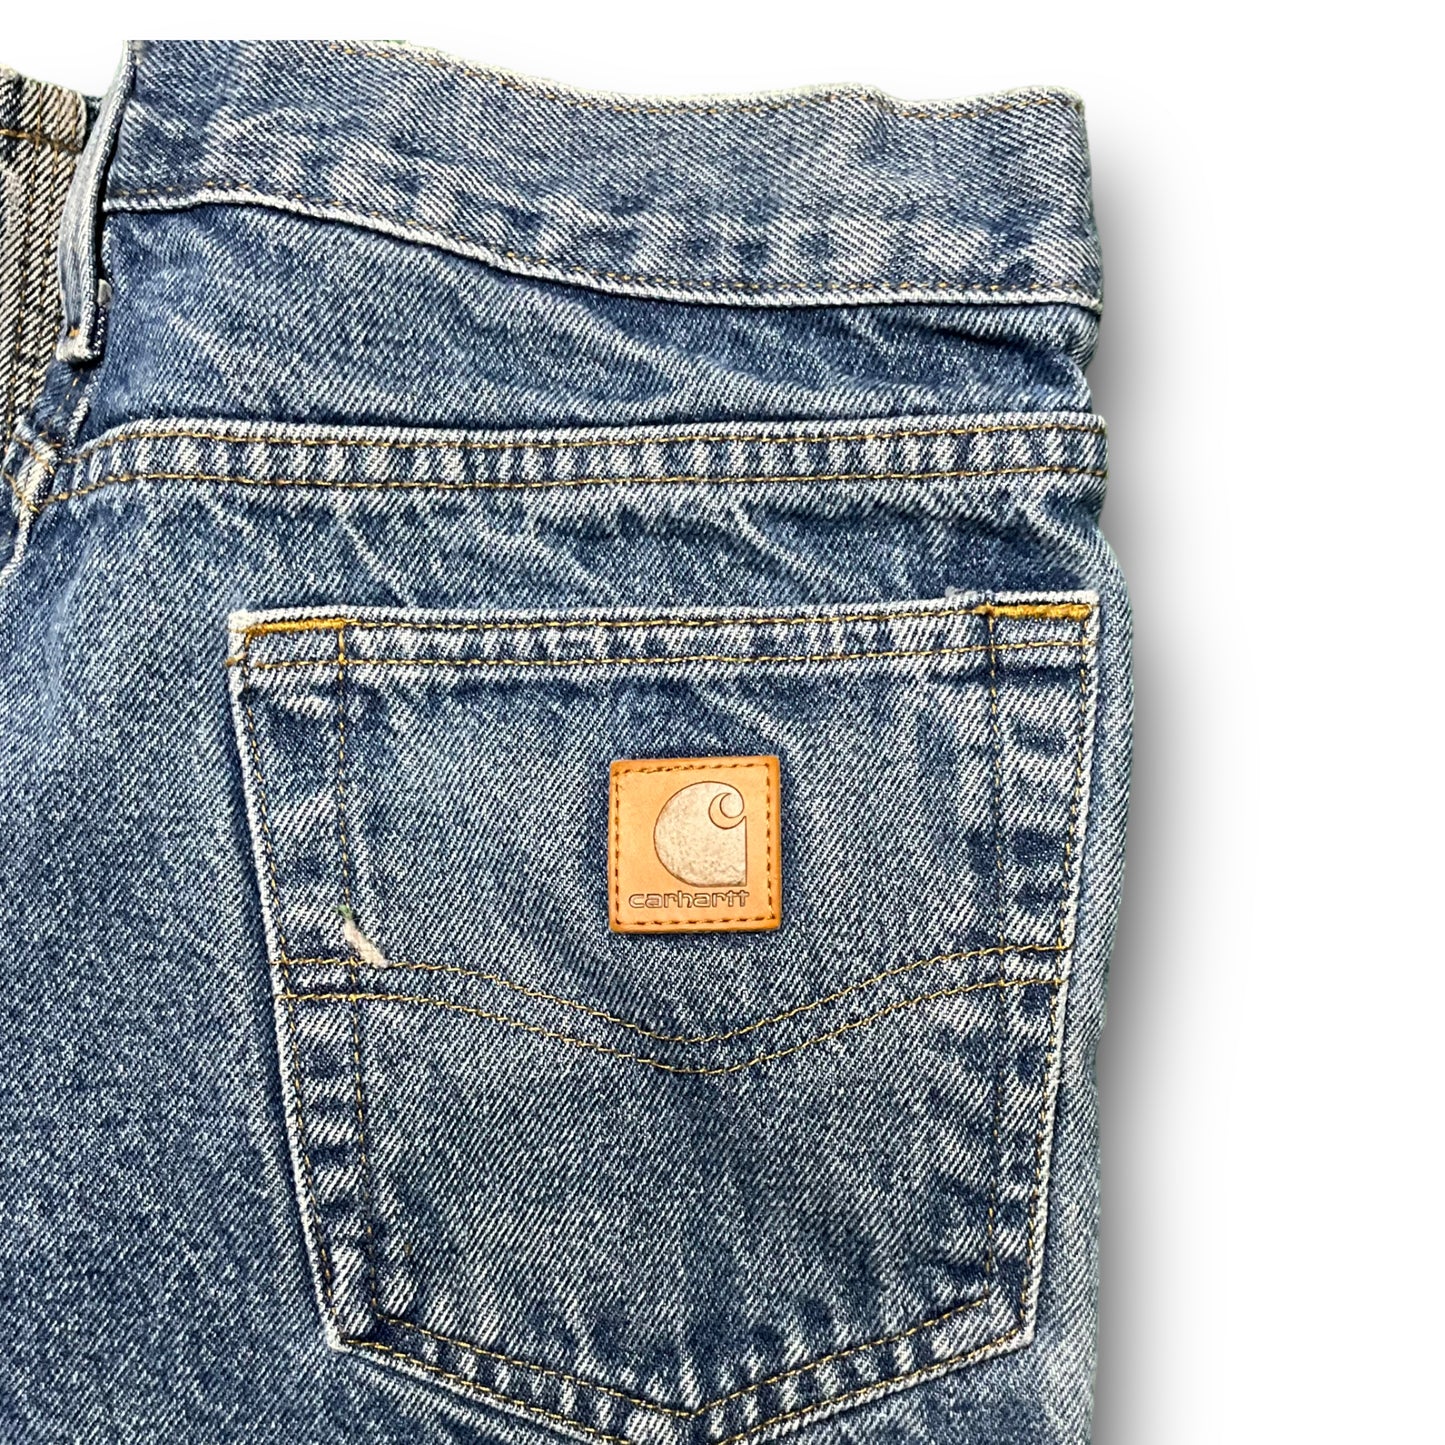 Carhartt Relaxed Fit Jeans (30x32)